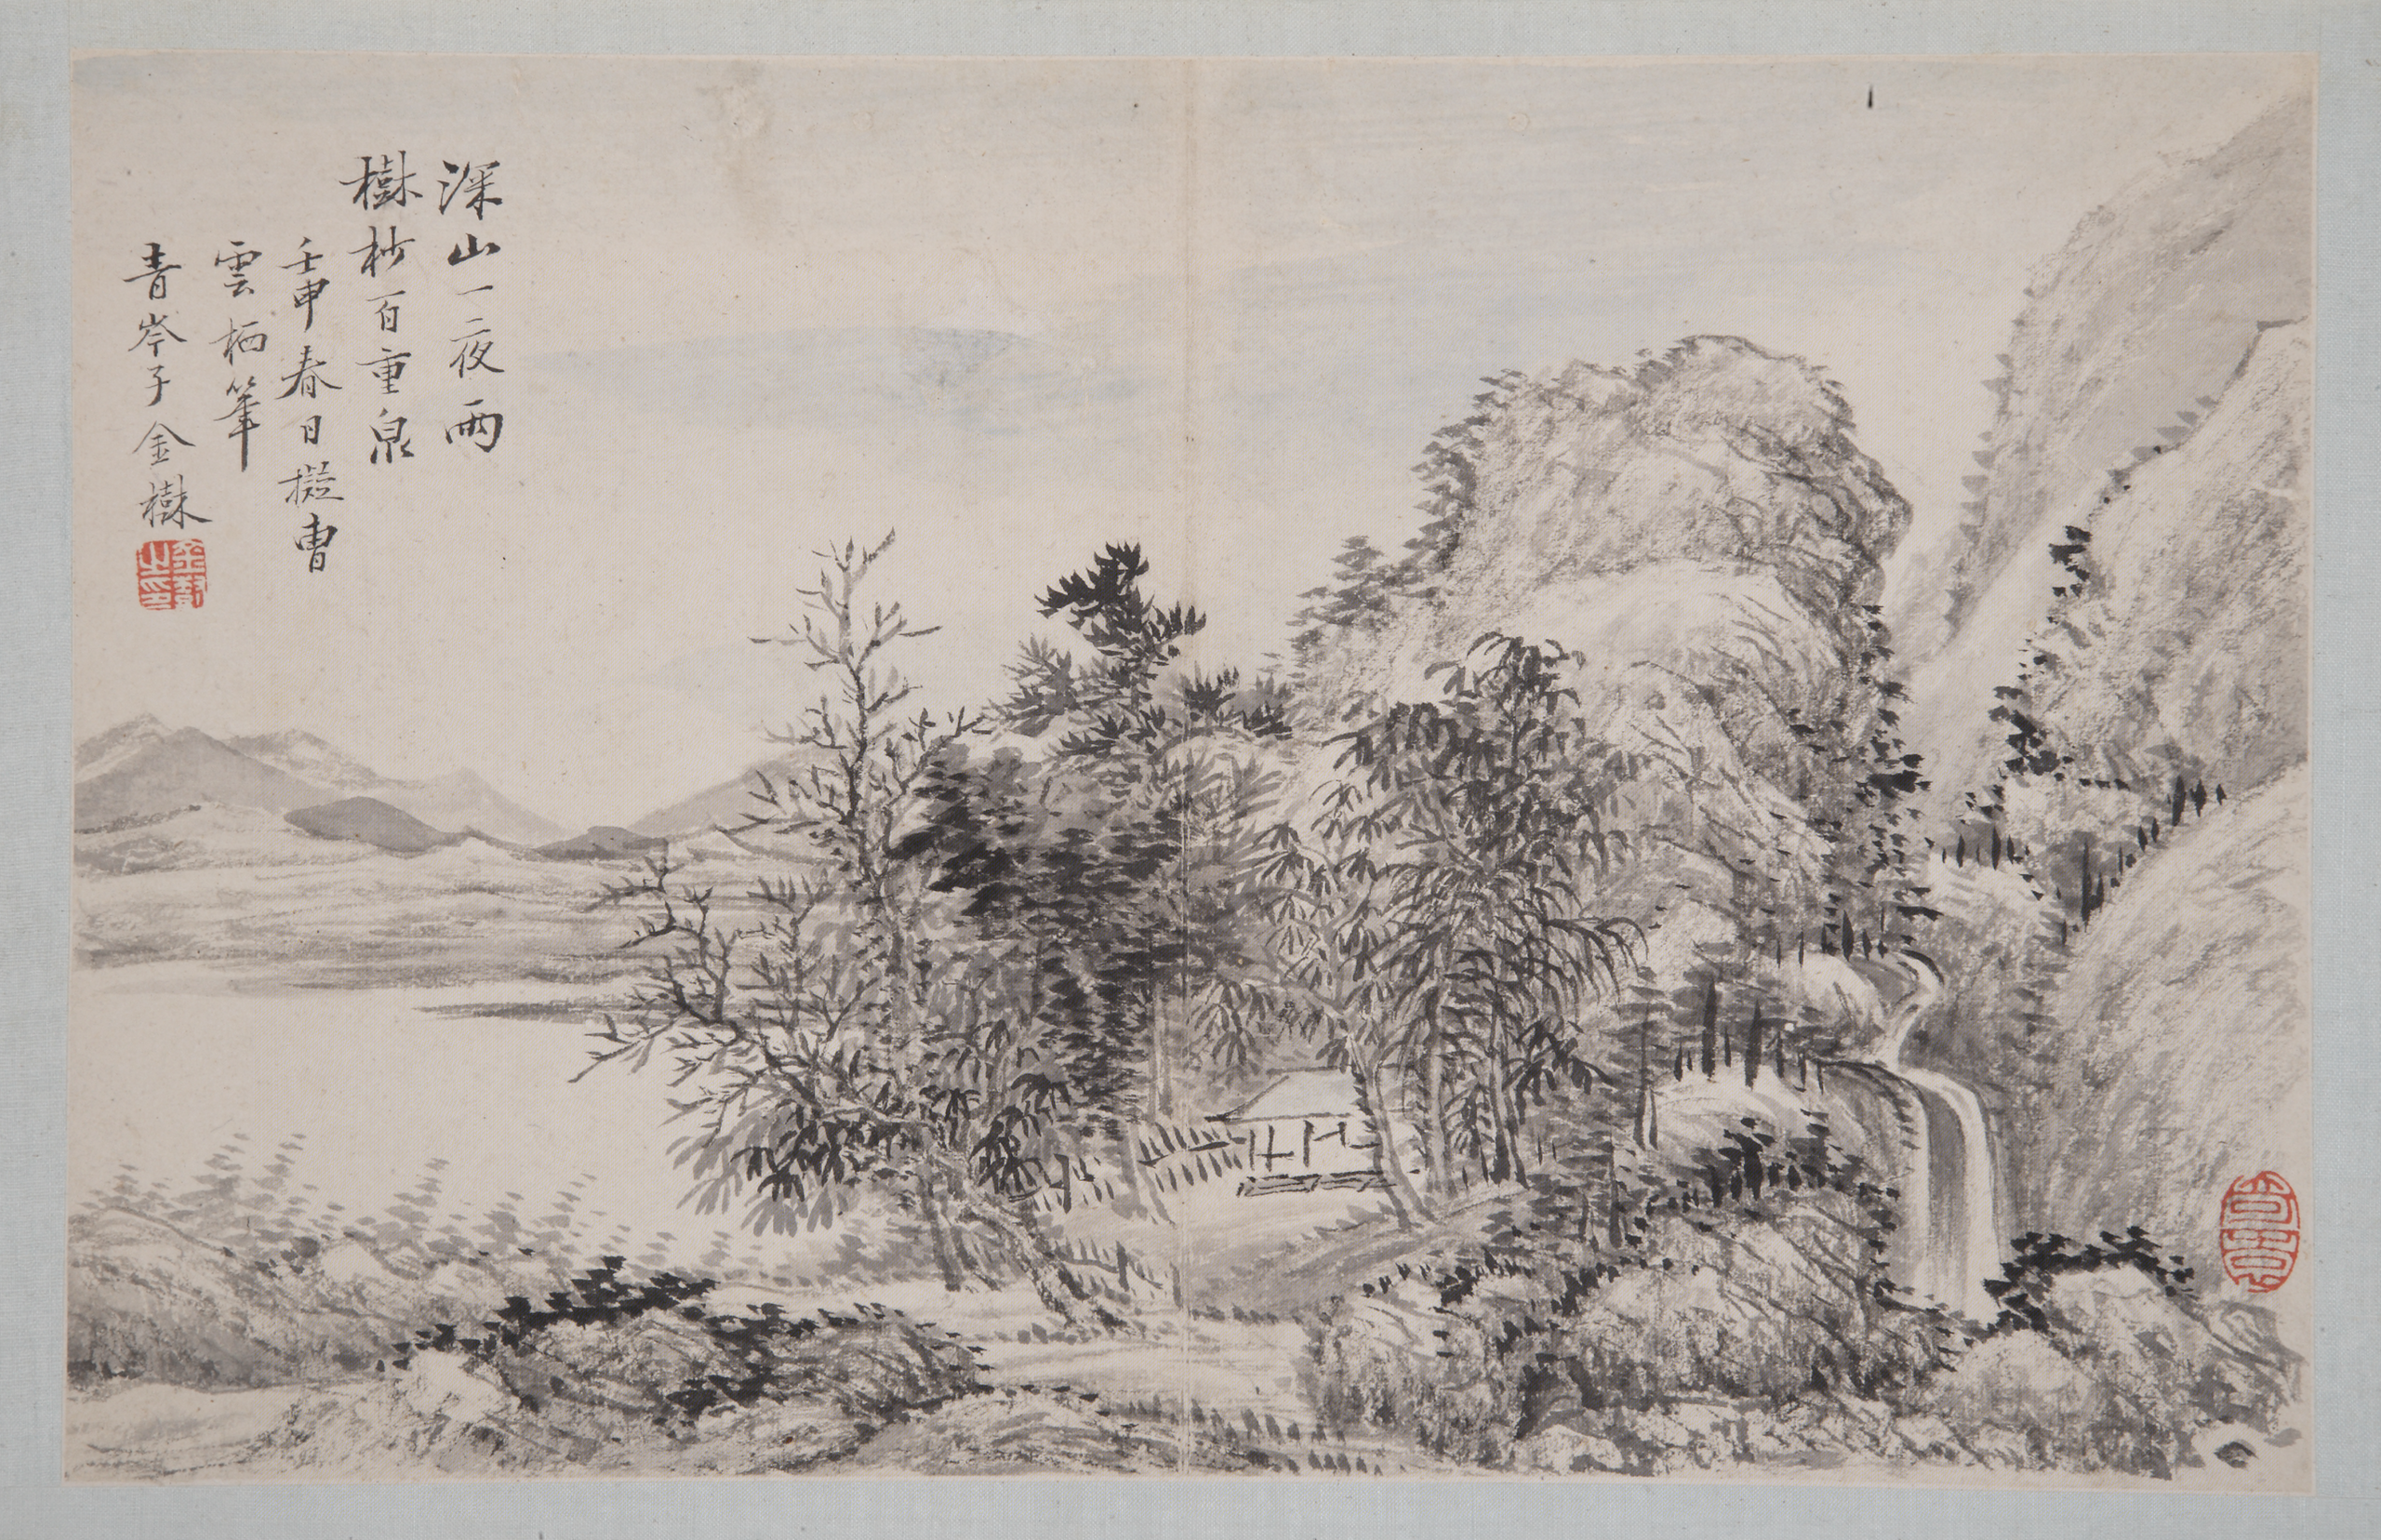 File:王翚等九家山水册-金树山林流泉页.png - Wikimedia Commons